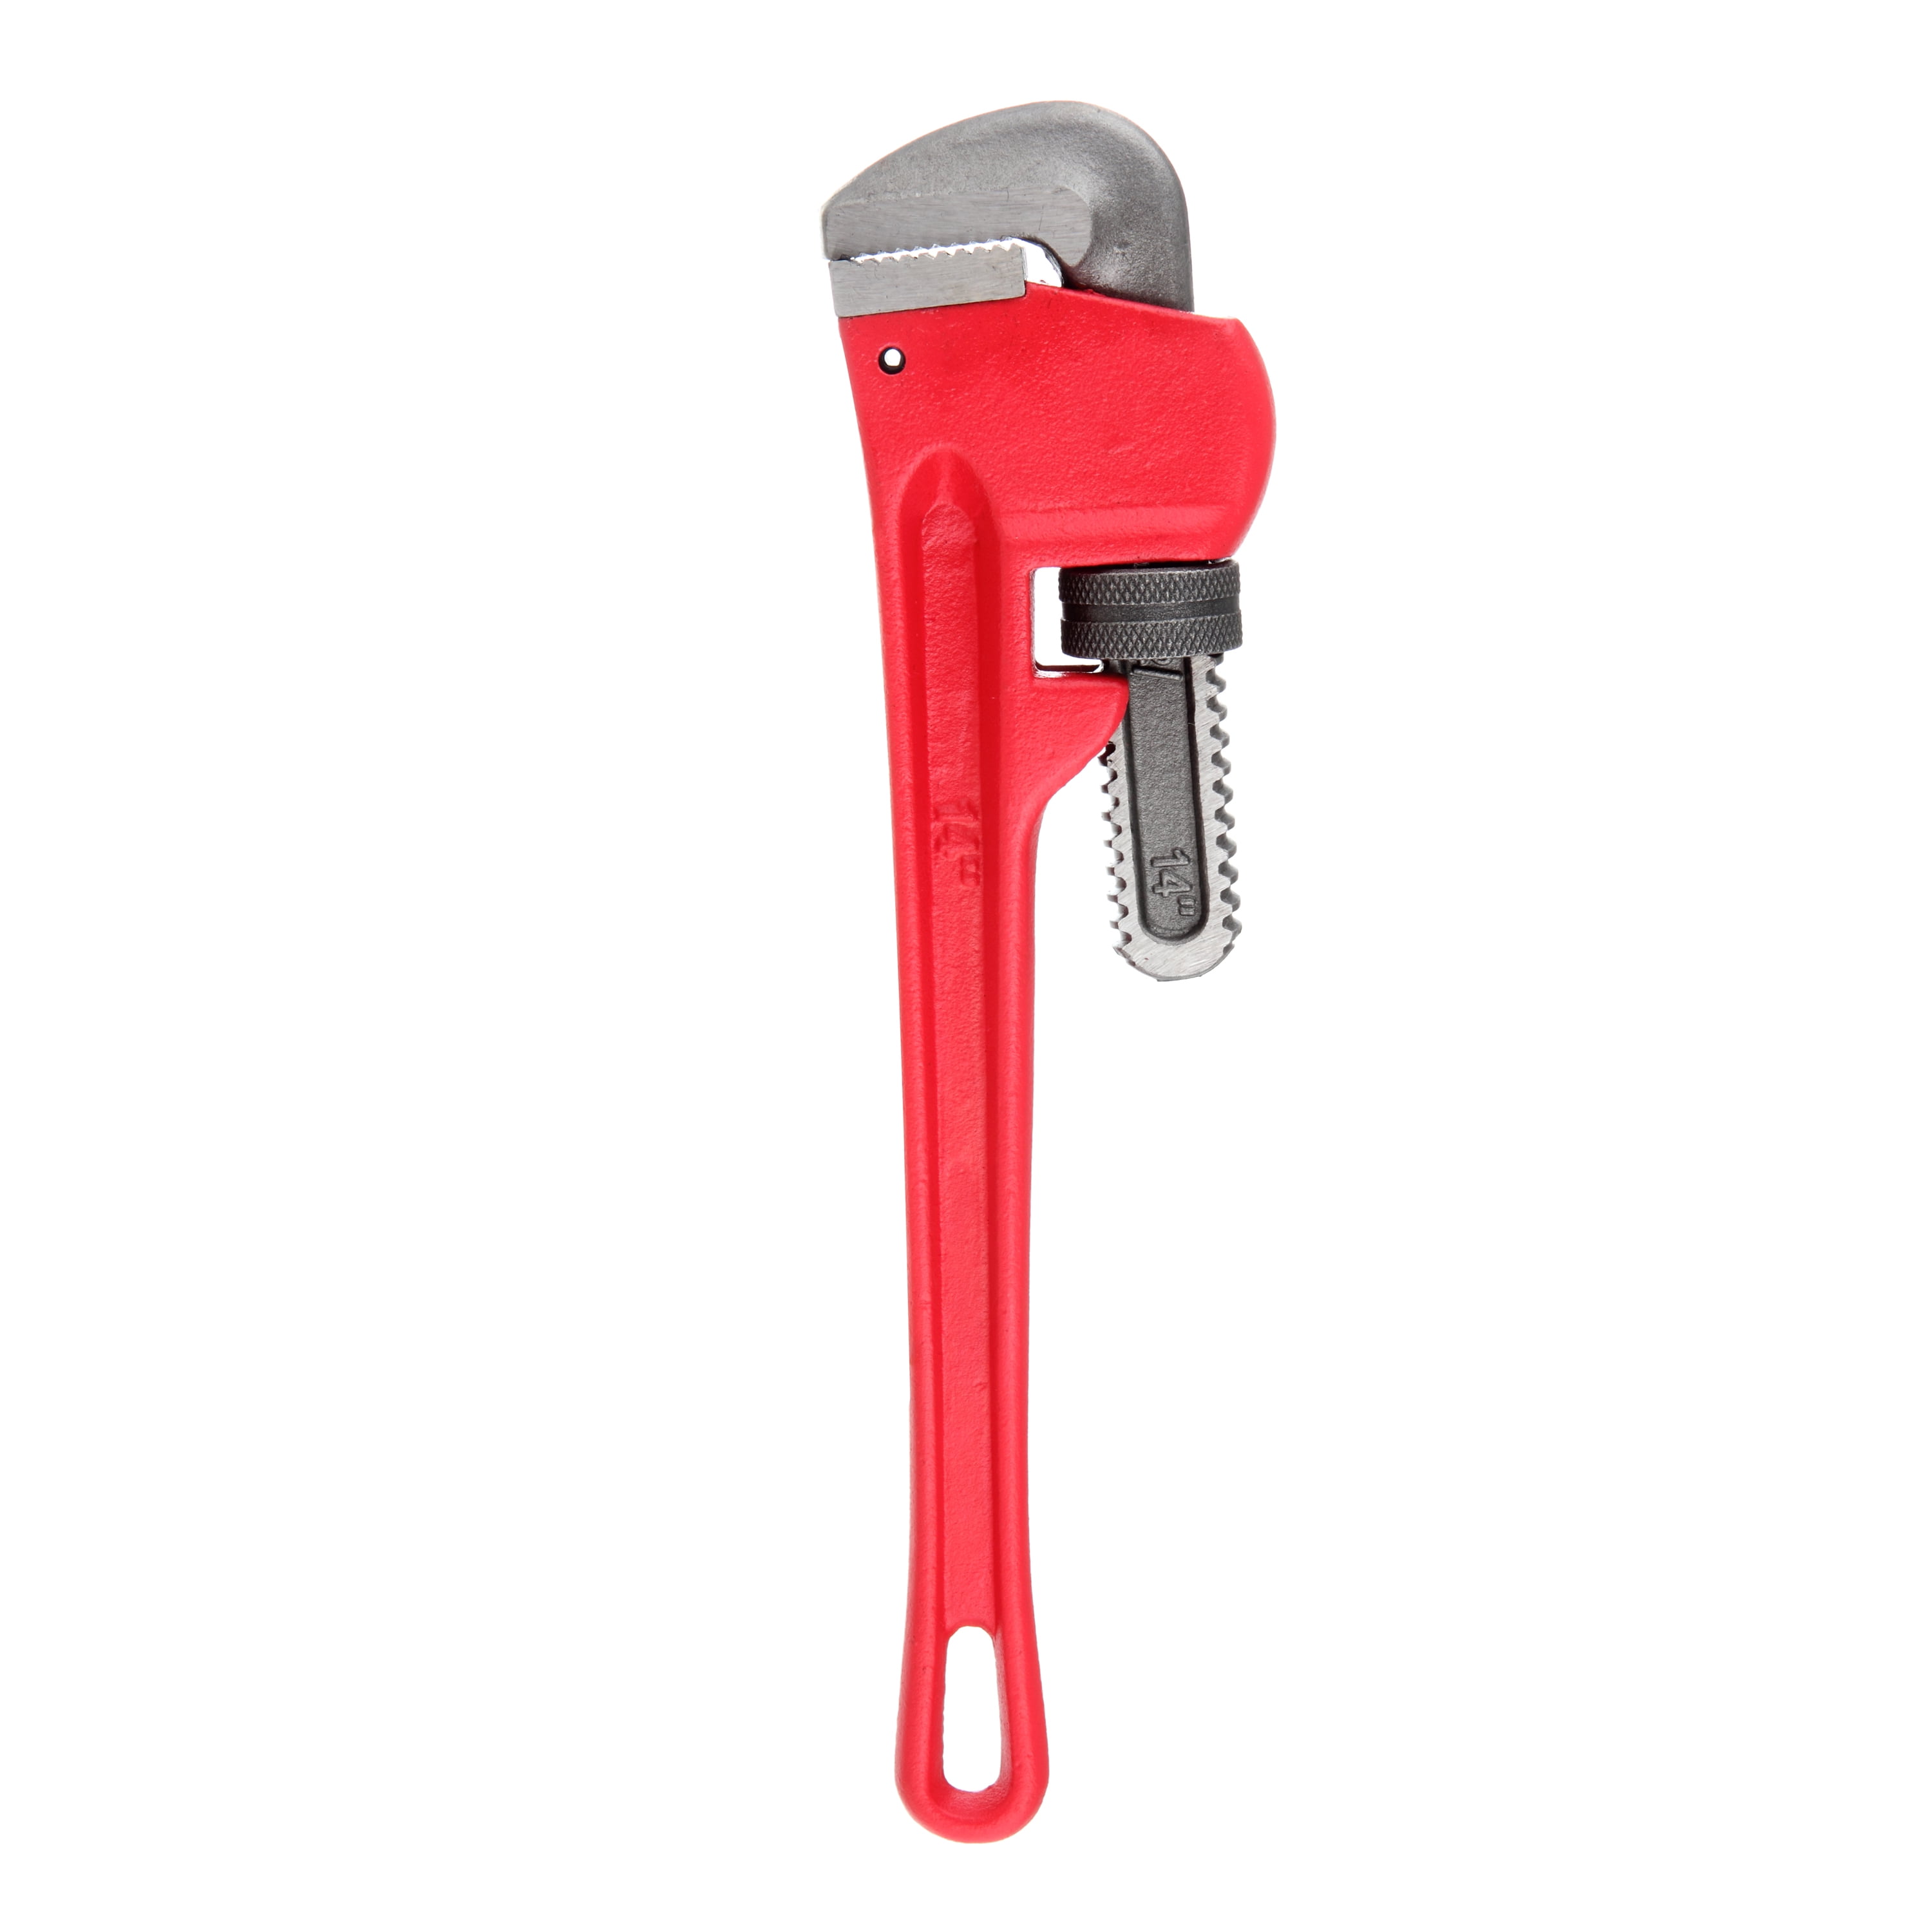 48 INCH LARGE BIG GIANT SIZE 4 FOOT LONG 8 JAW CAPACITY ALUMINUM HANDLE PIPE WRENCH TOOL… 